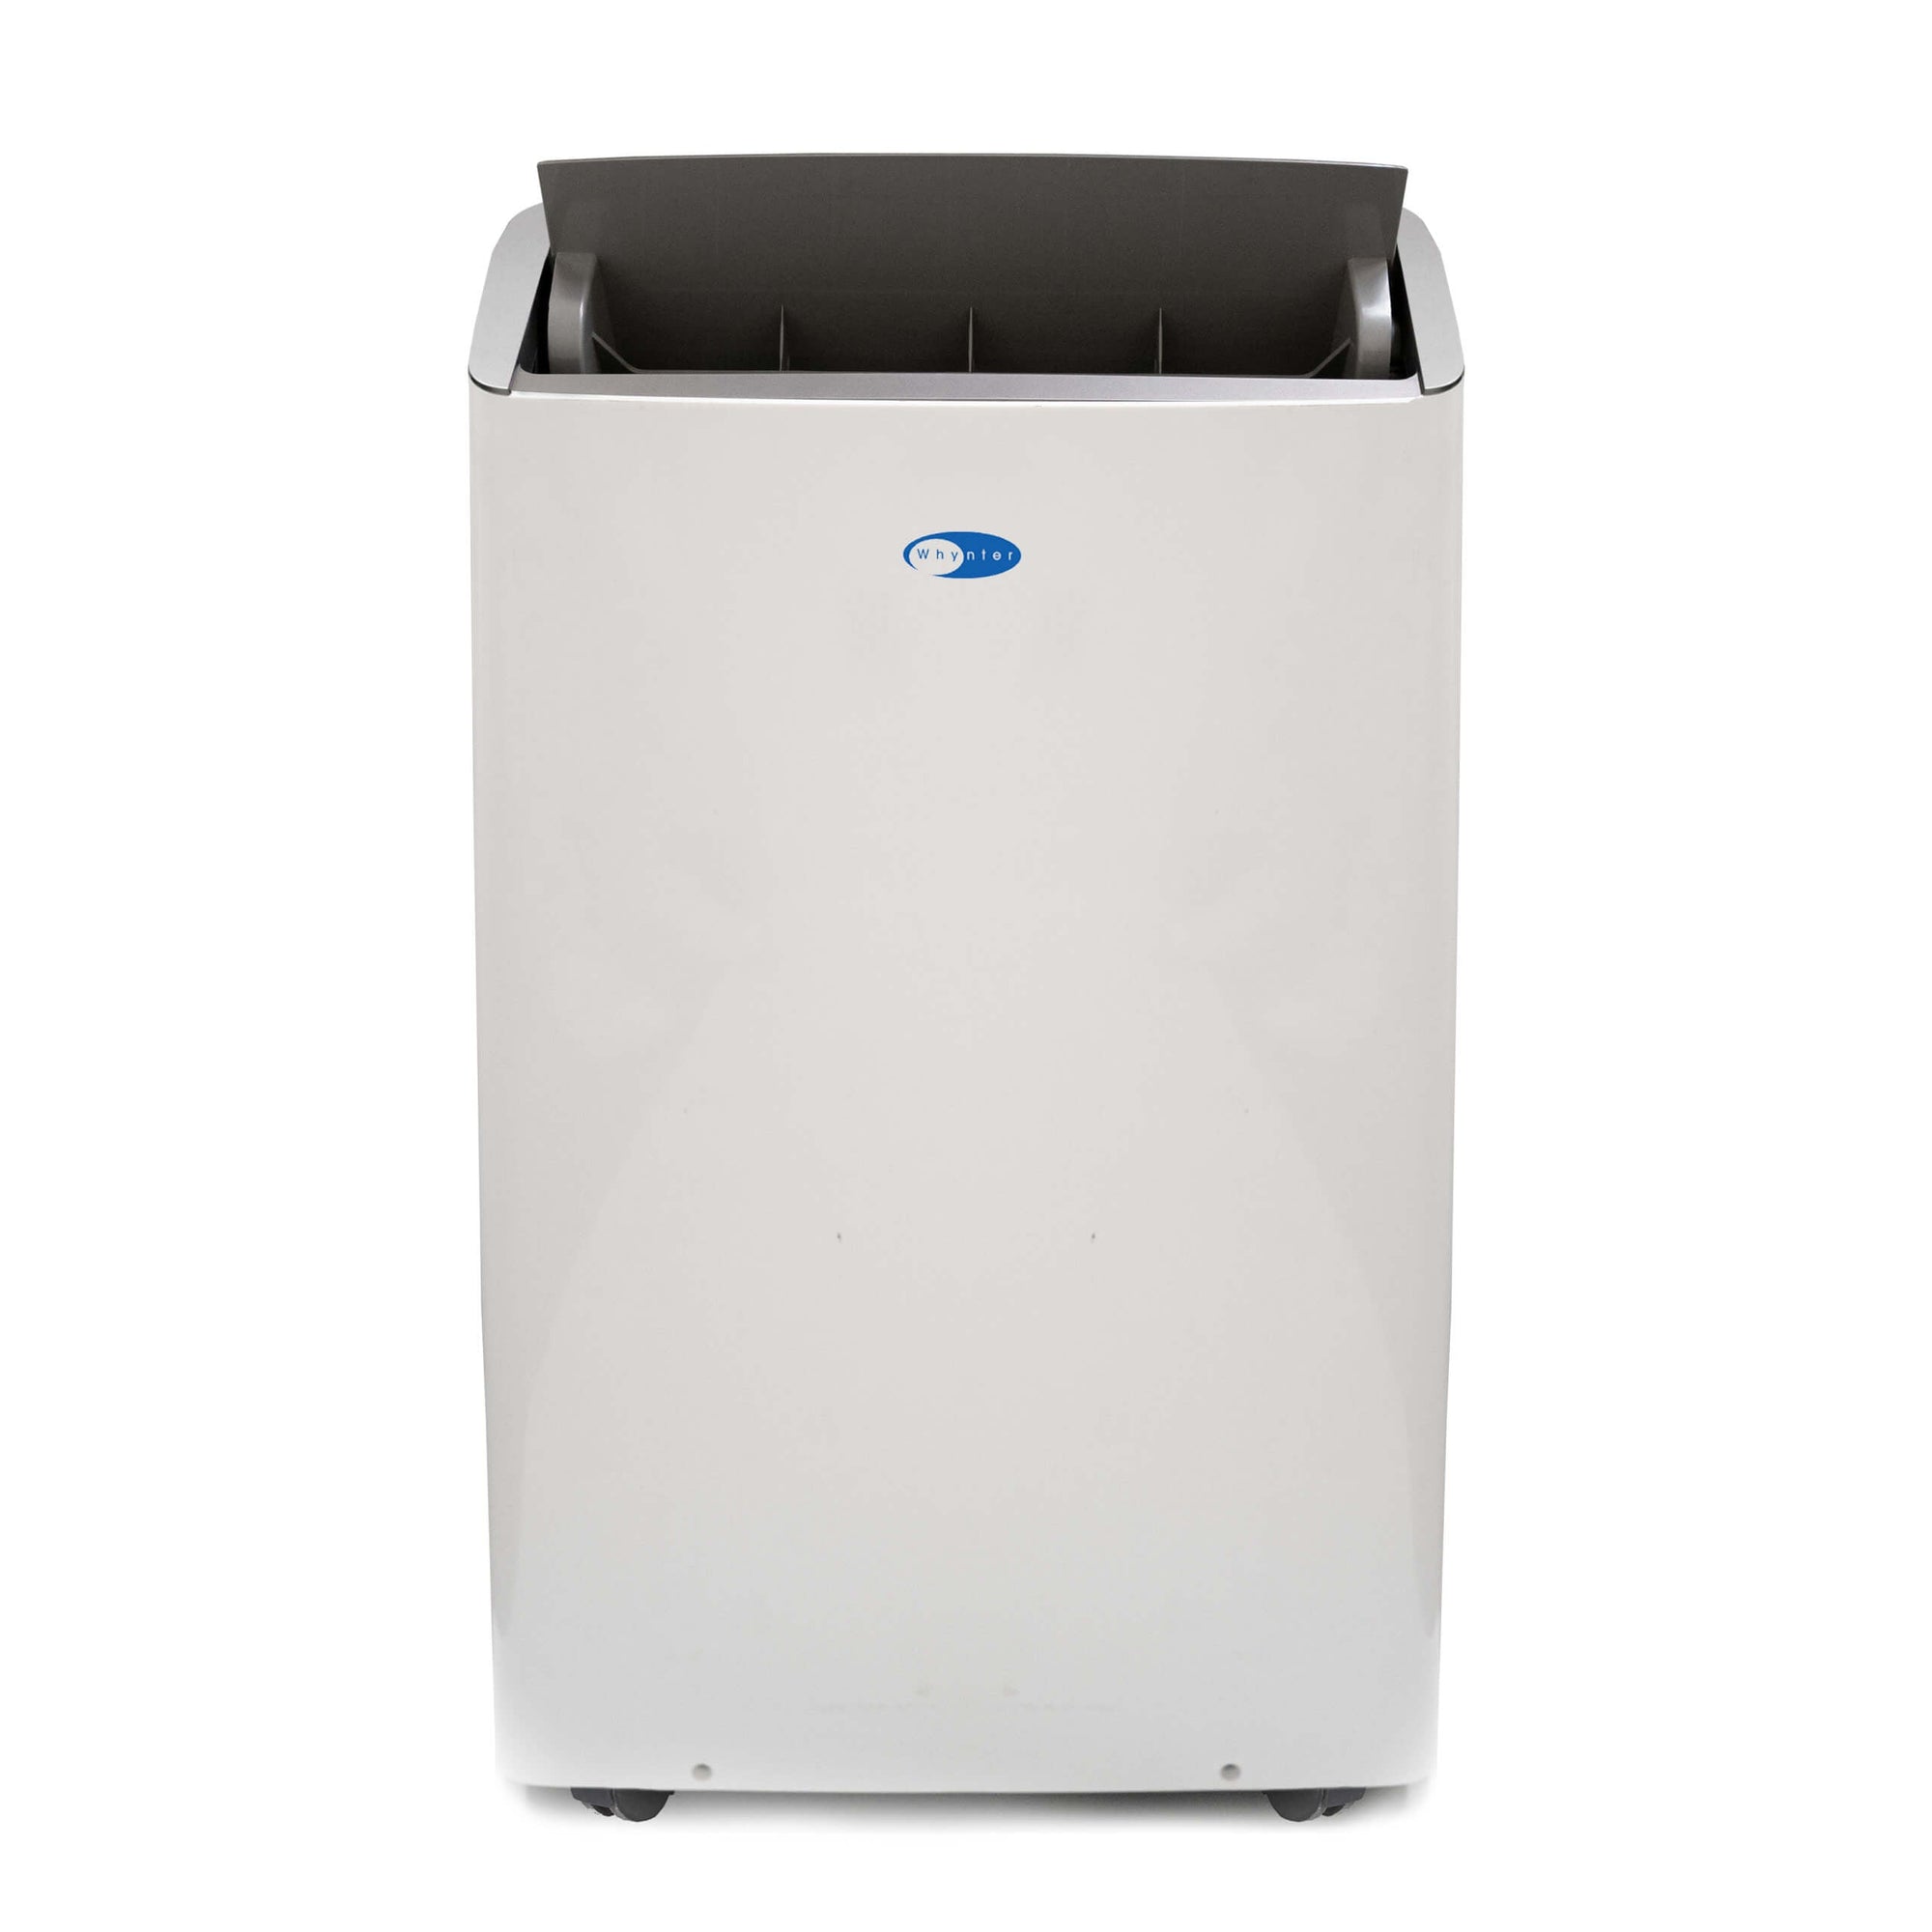 Whynter ARC-1230WN 12,000 BTU SACC in White Inverter Dual Hose Portable Air Conditioner with Smart Wi-Fi New